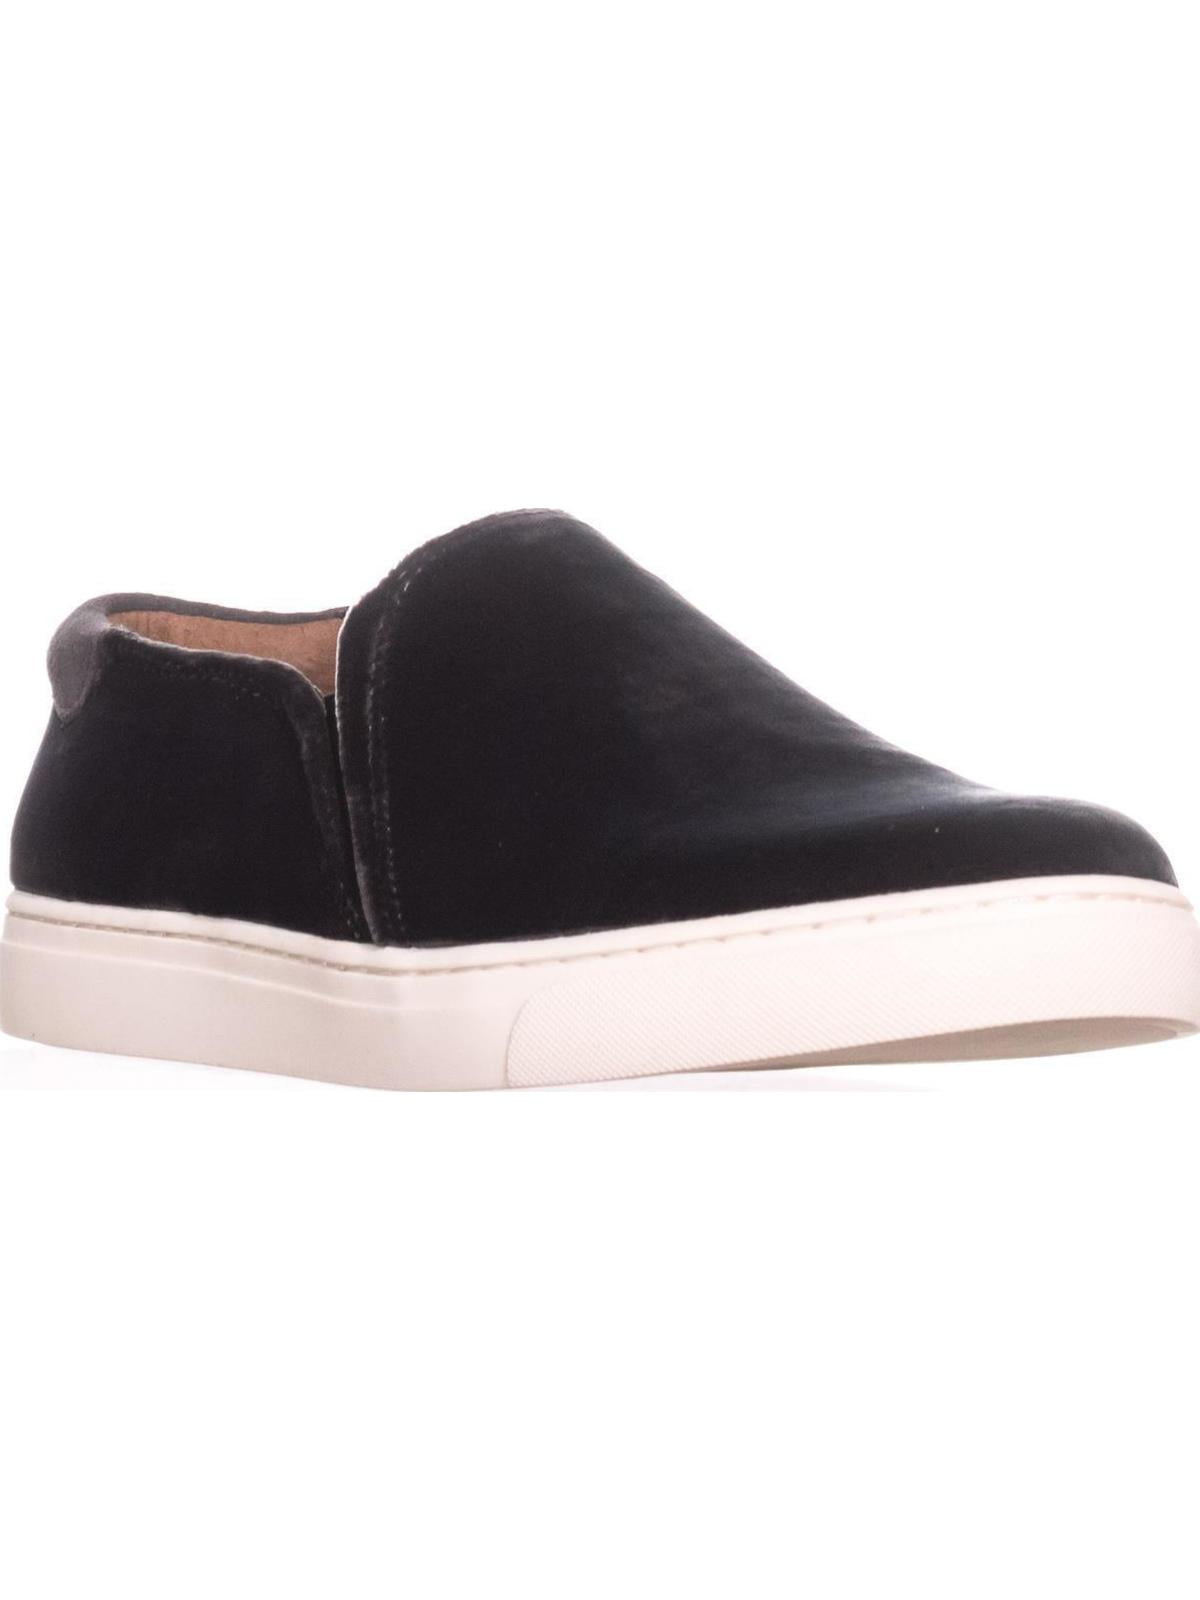 Womens Lucky Brand Lupa Slip-On Sneakers, Storm, 8.5 US / 38.5 EU ...